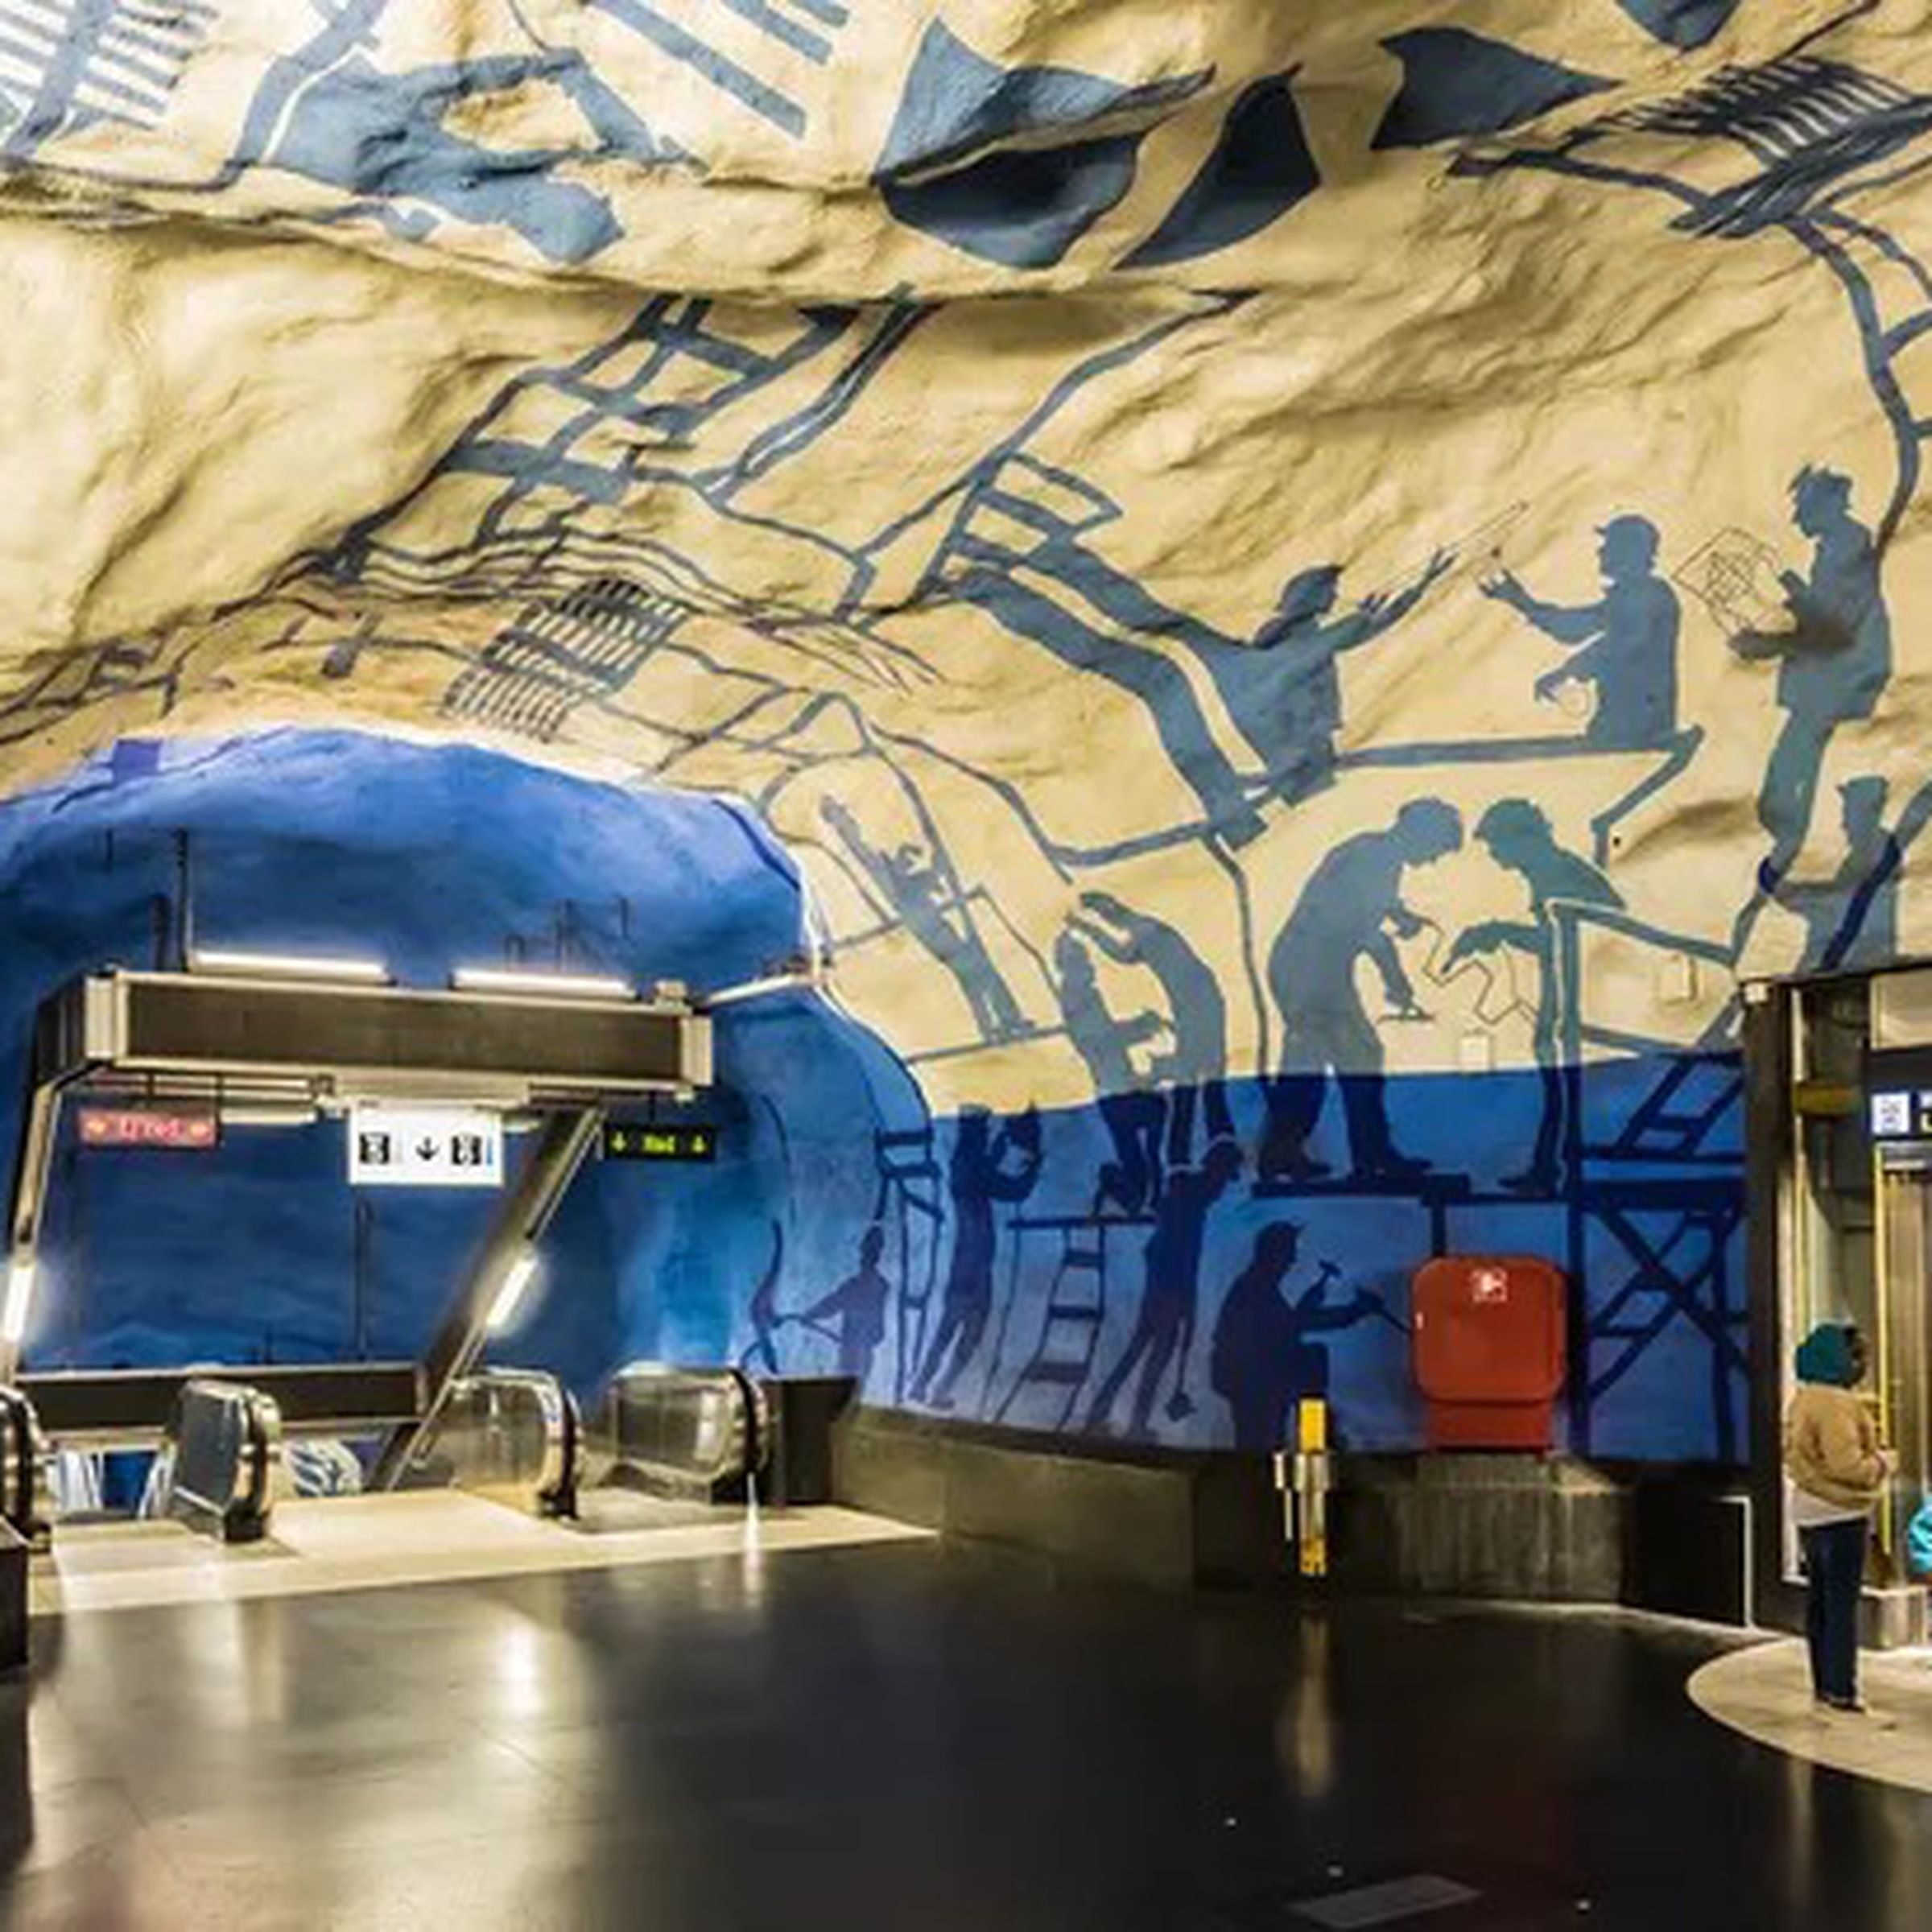 Stockholm’s subway stations are accessible, reliable, and family-friendly. 